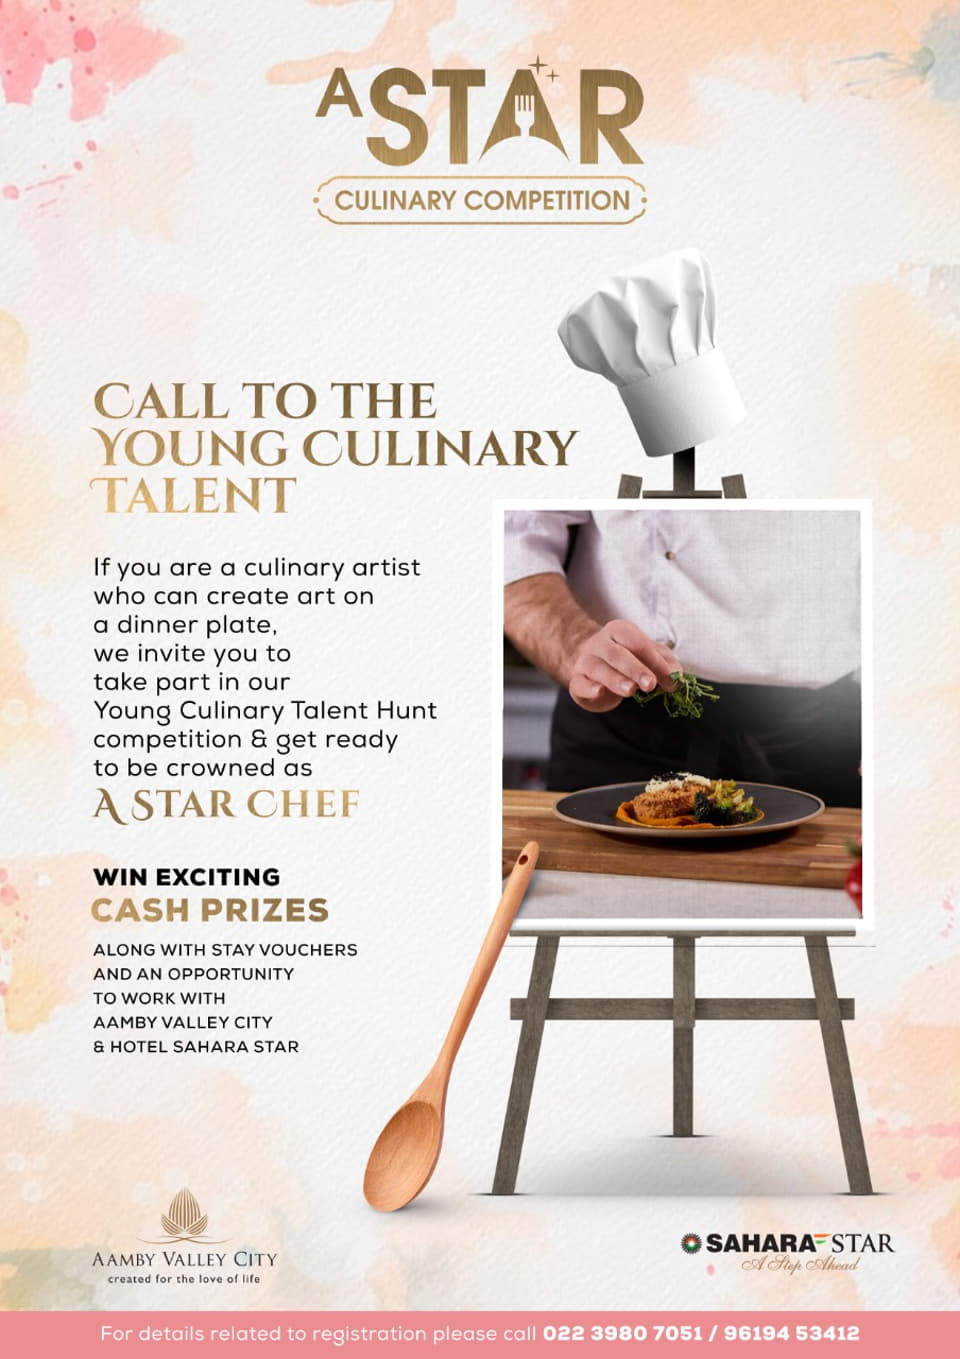 Sahara Star And Aamby Valley City Announce The Star Culinary Competition 